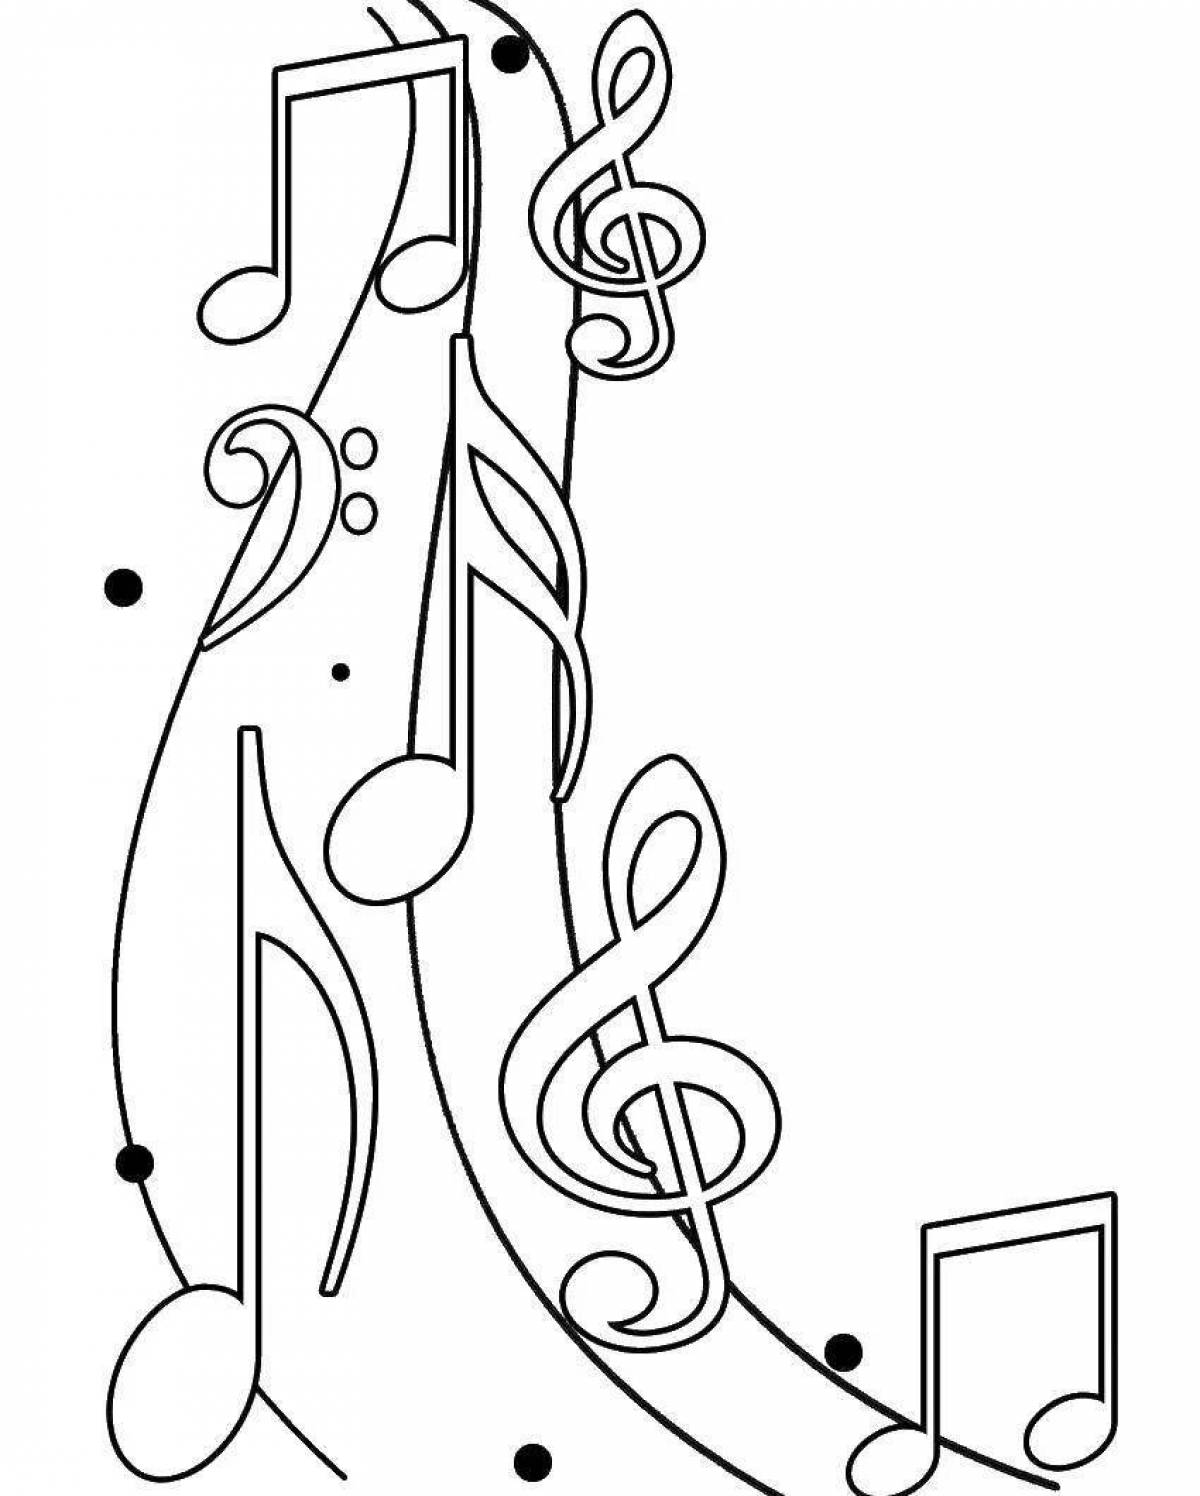 Charming music coloring book